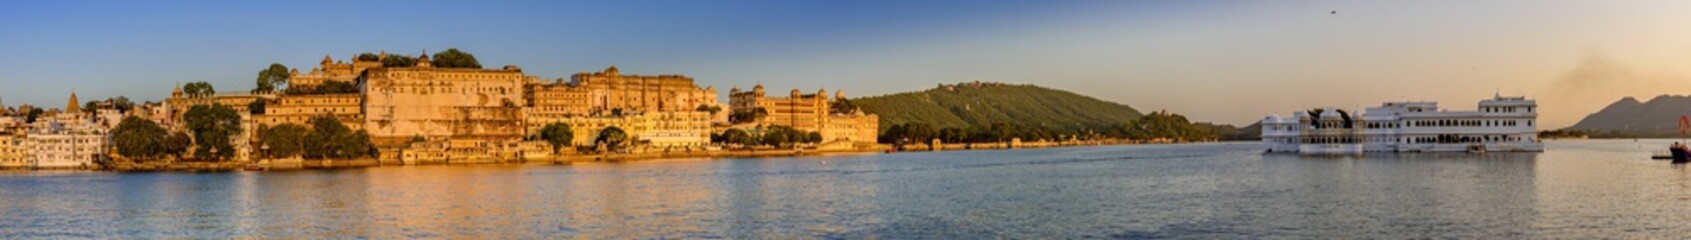 Fototapeta na wymiar View of Pichola Lake near Udaipur city palace. It is an artificial lake popular for boating among tourist who visits City of lakes to enjoy vacations in Rajasthan